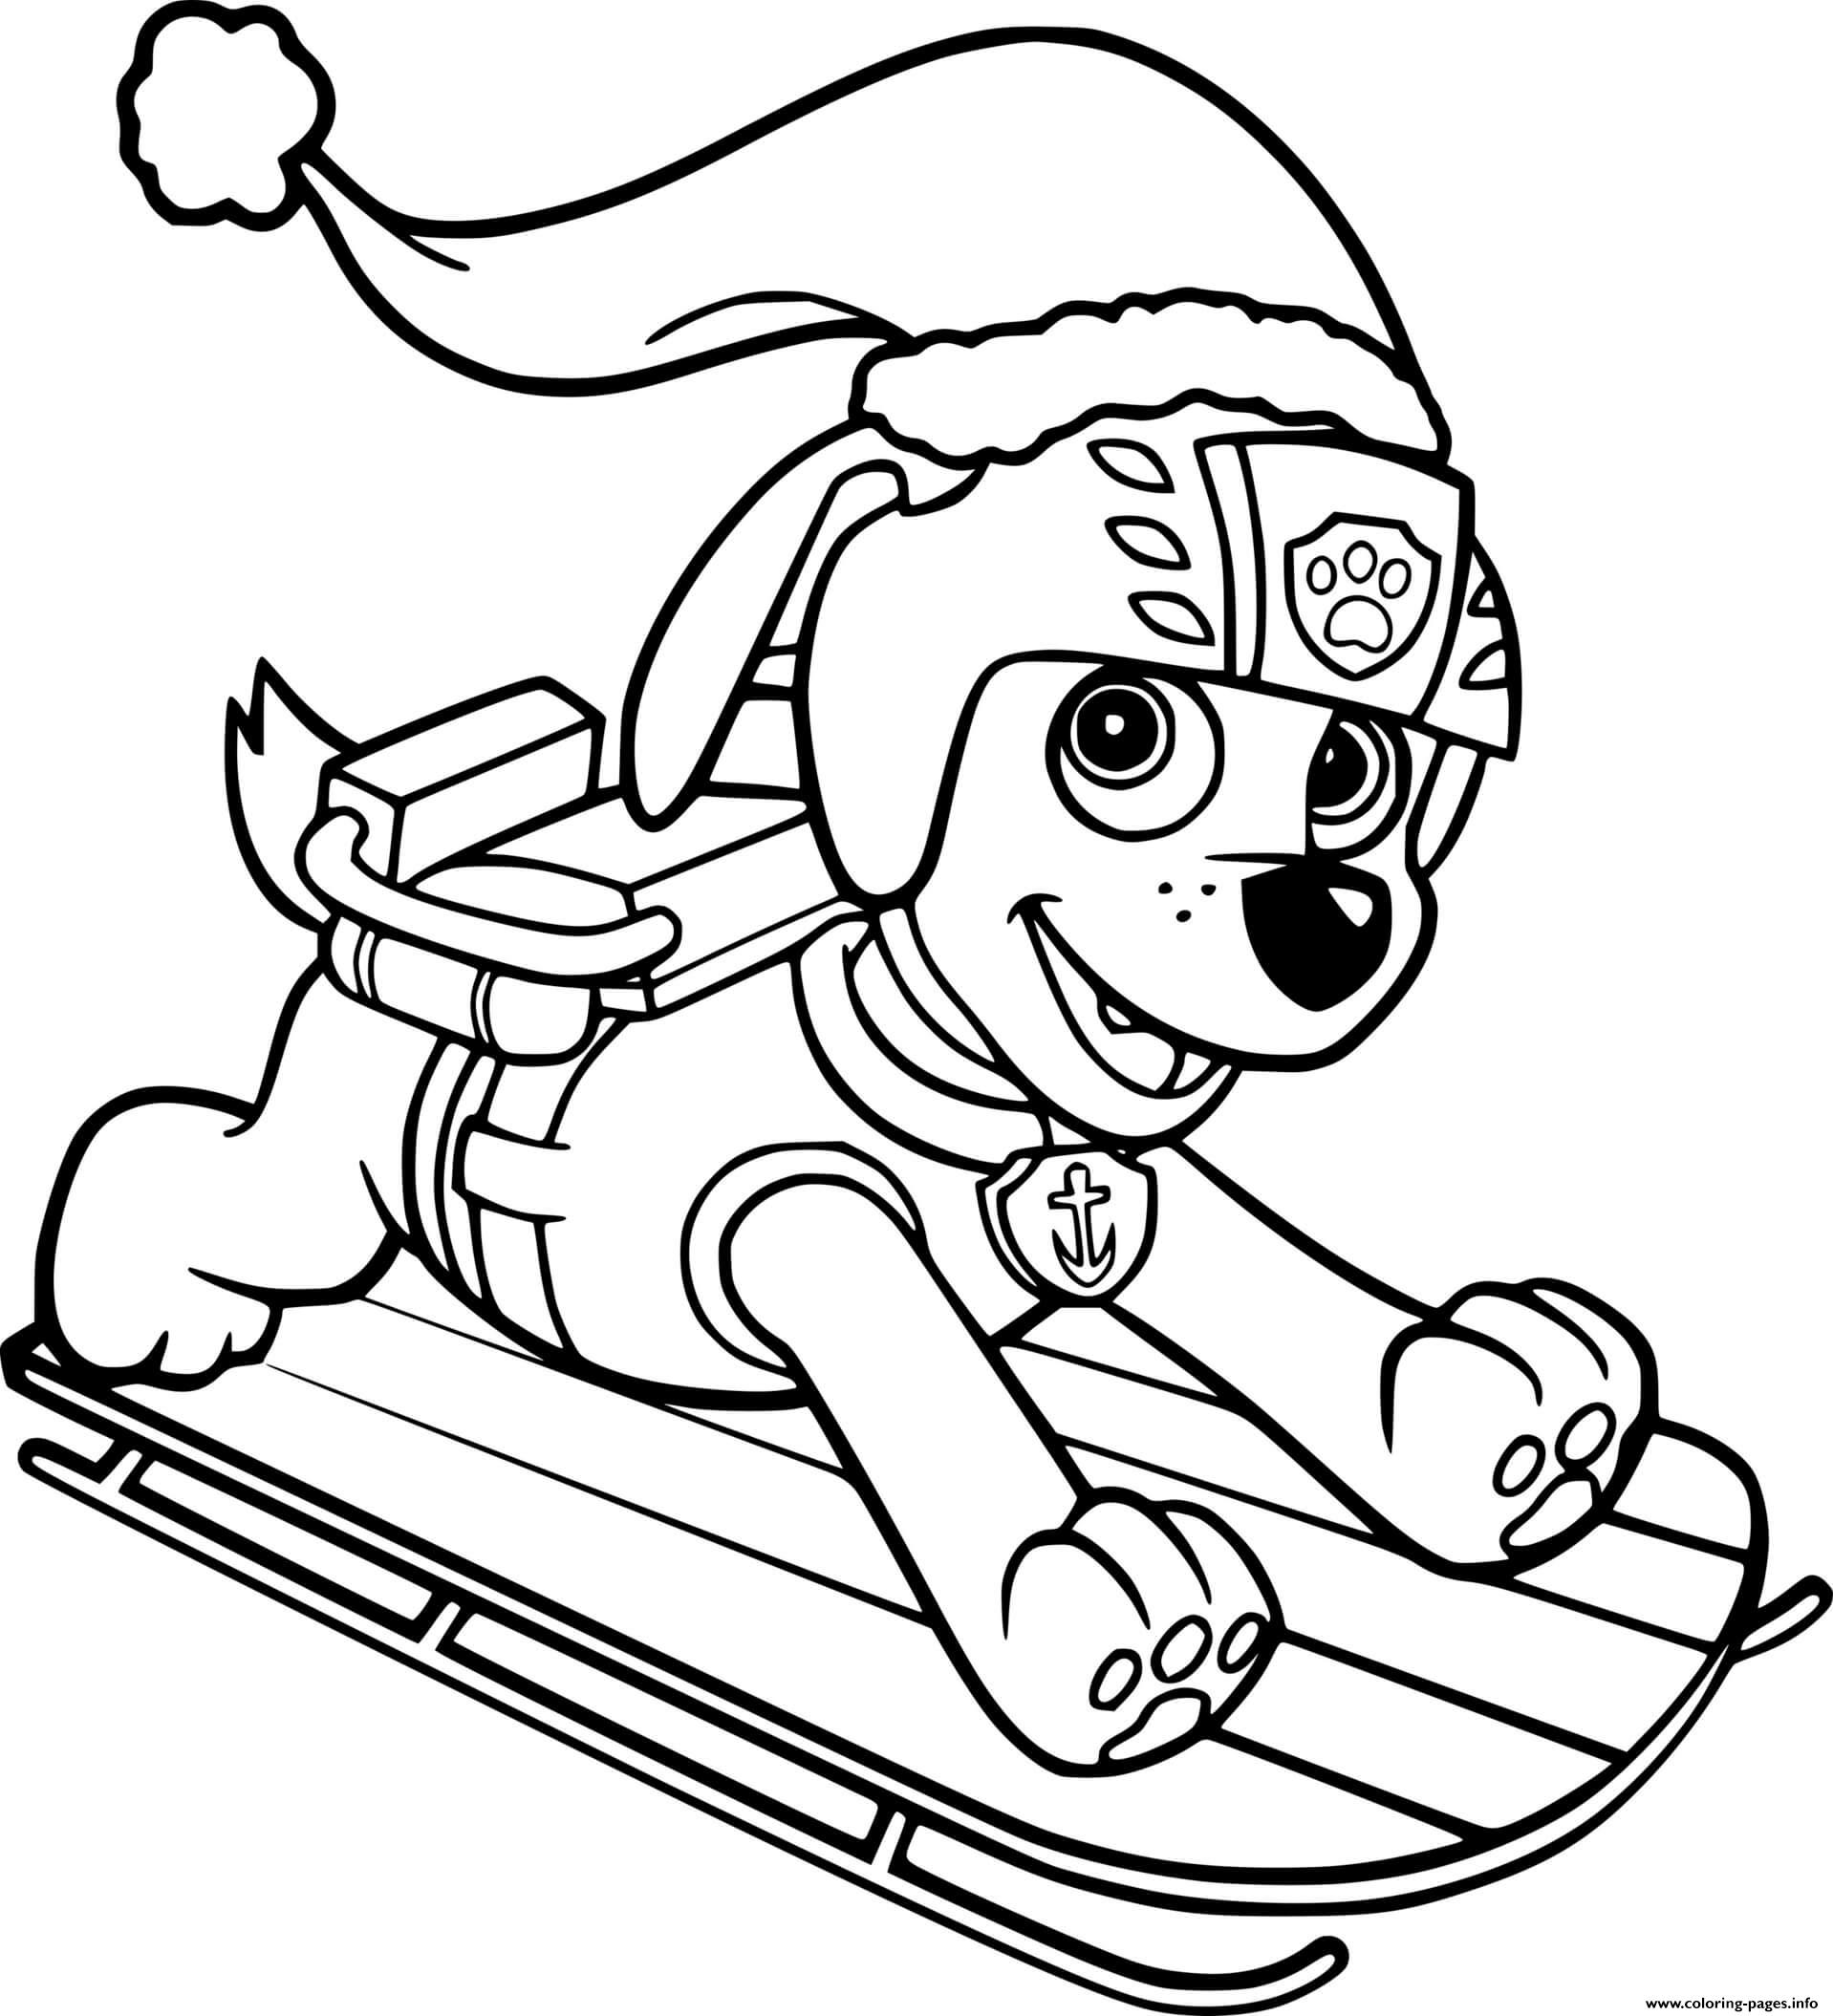 Zuma In The Christmas Hat On The Sled coloring